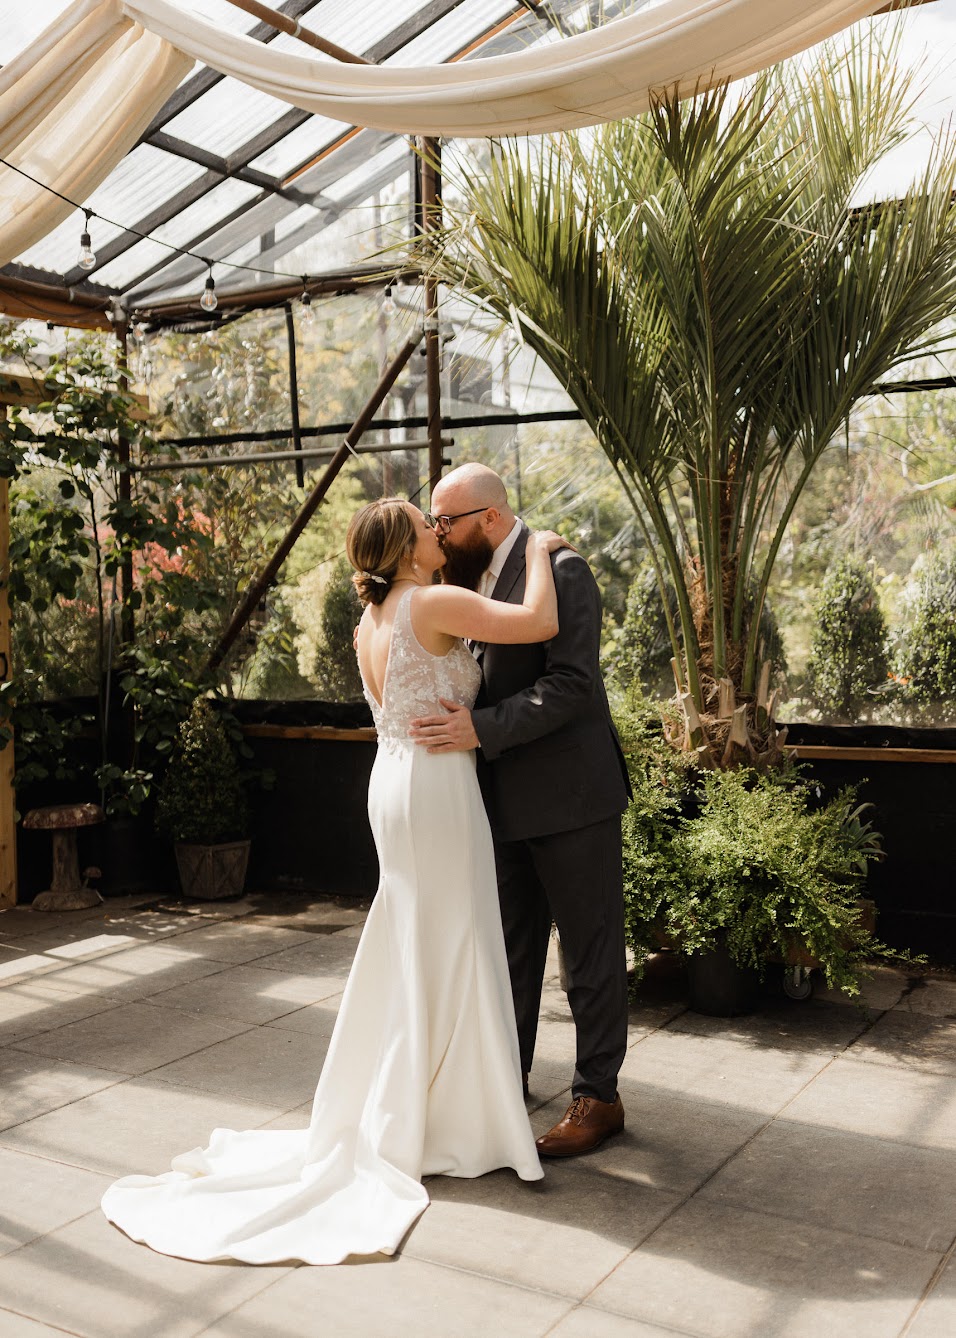 Creative and adorable, this is the most popular wedding first look picture. The bride and groom's initial meeting moment in a garden was captured perfectly.